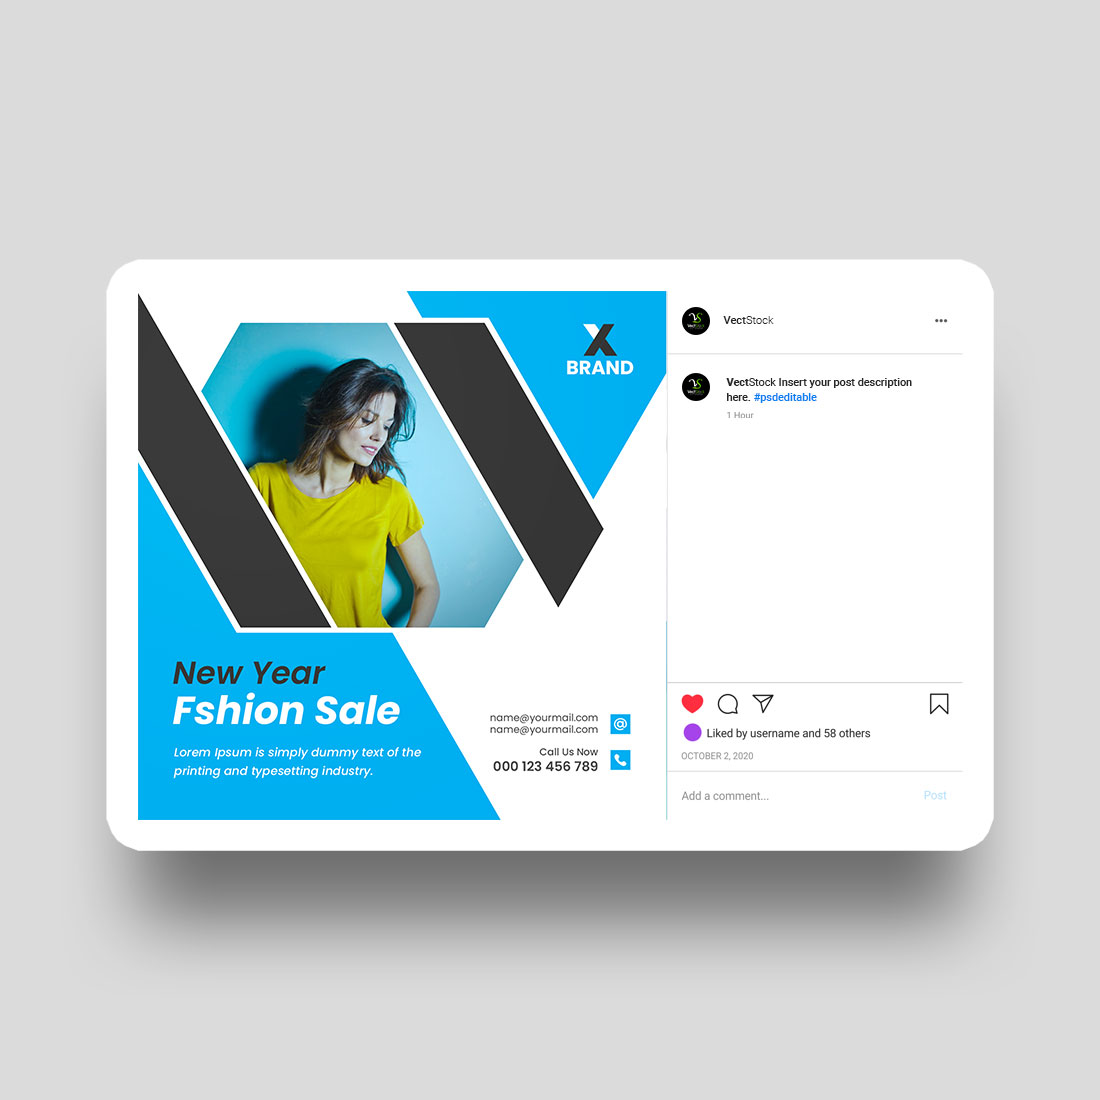 Yew year fashion sale social media Instagram post and banner template design preview image.